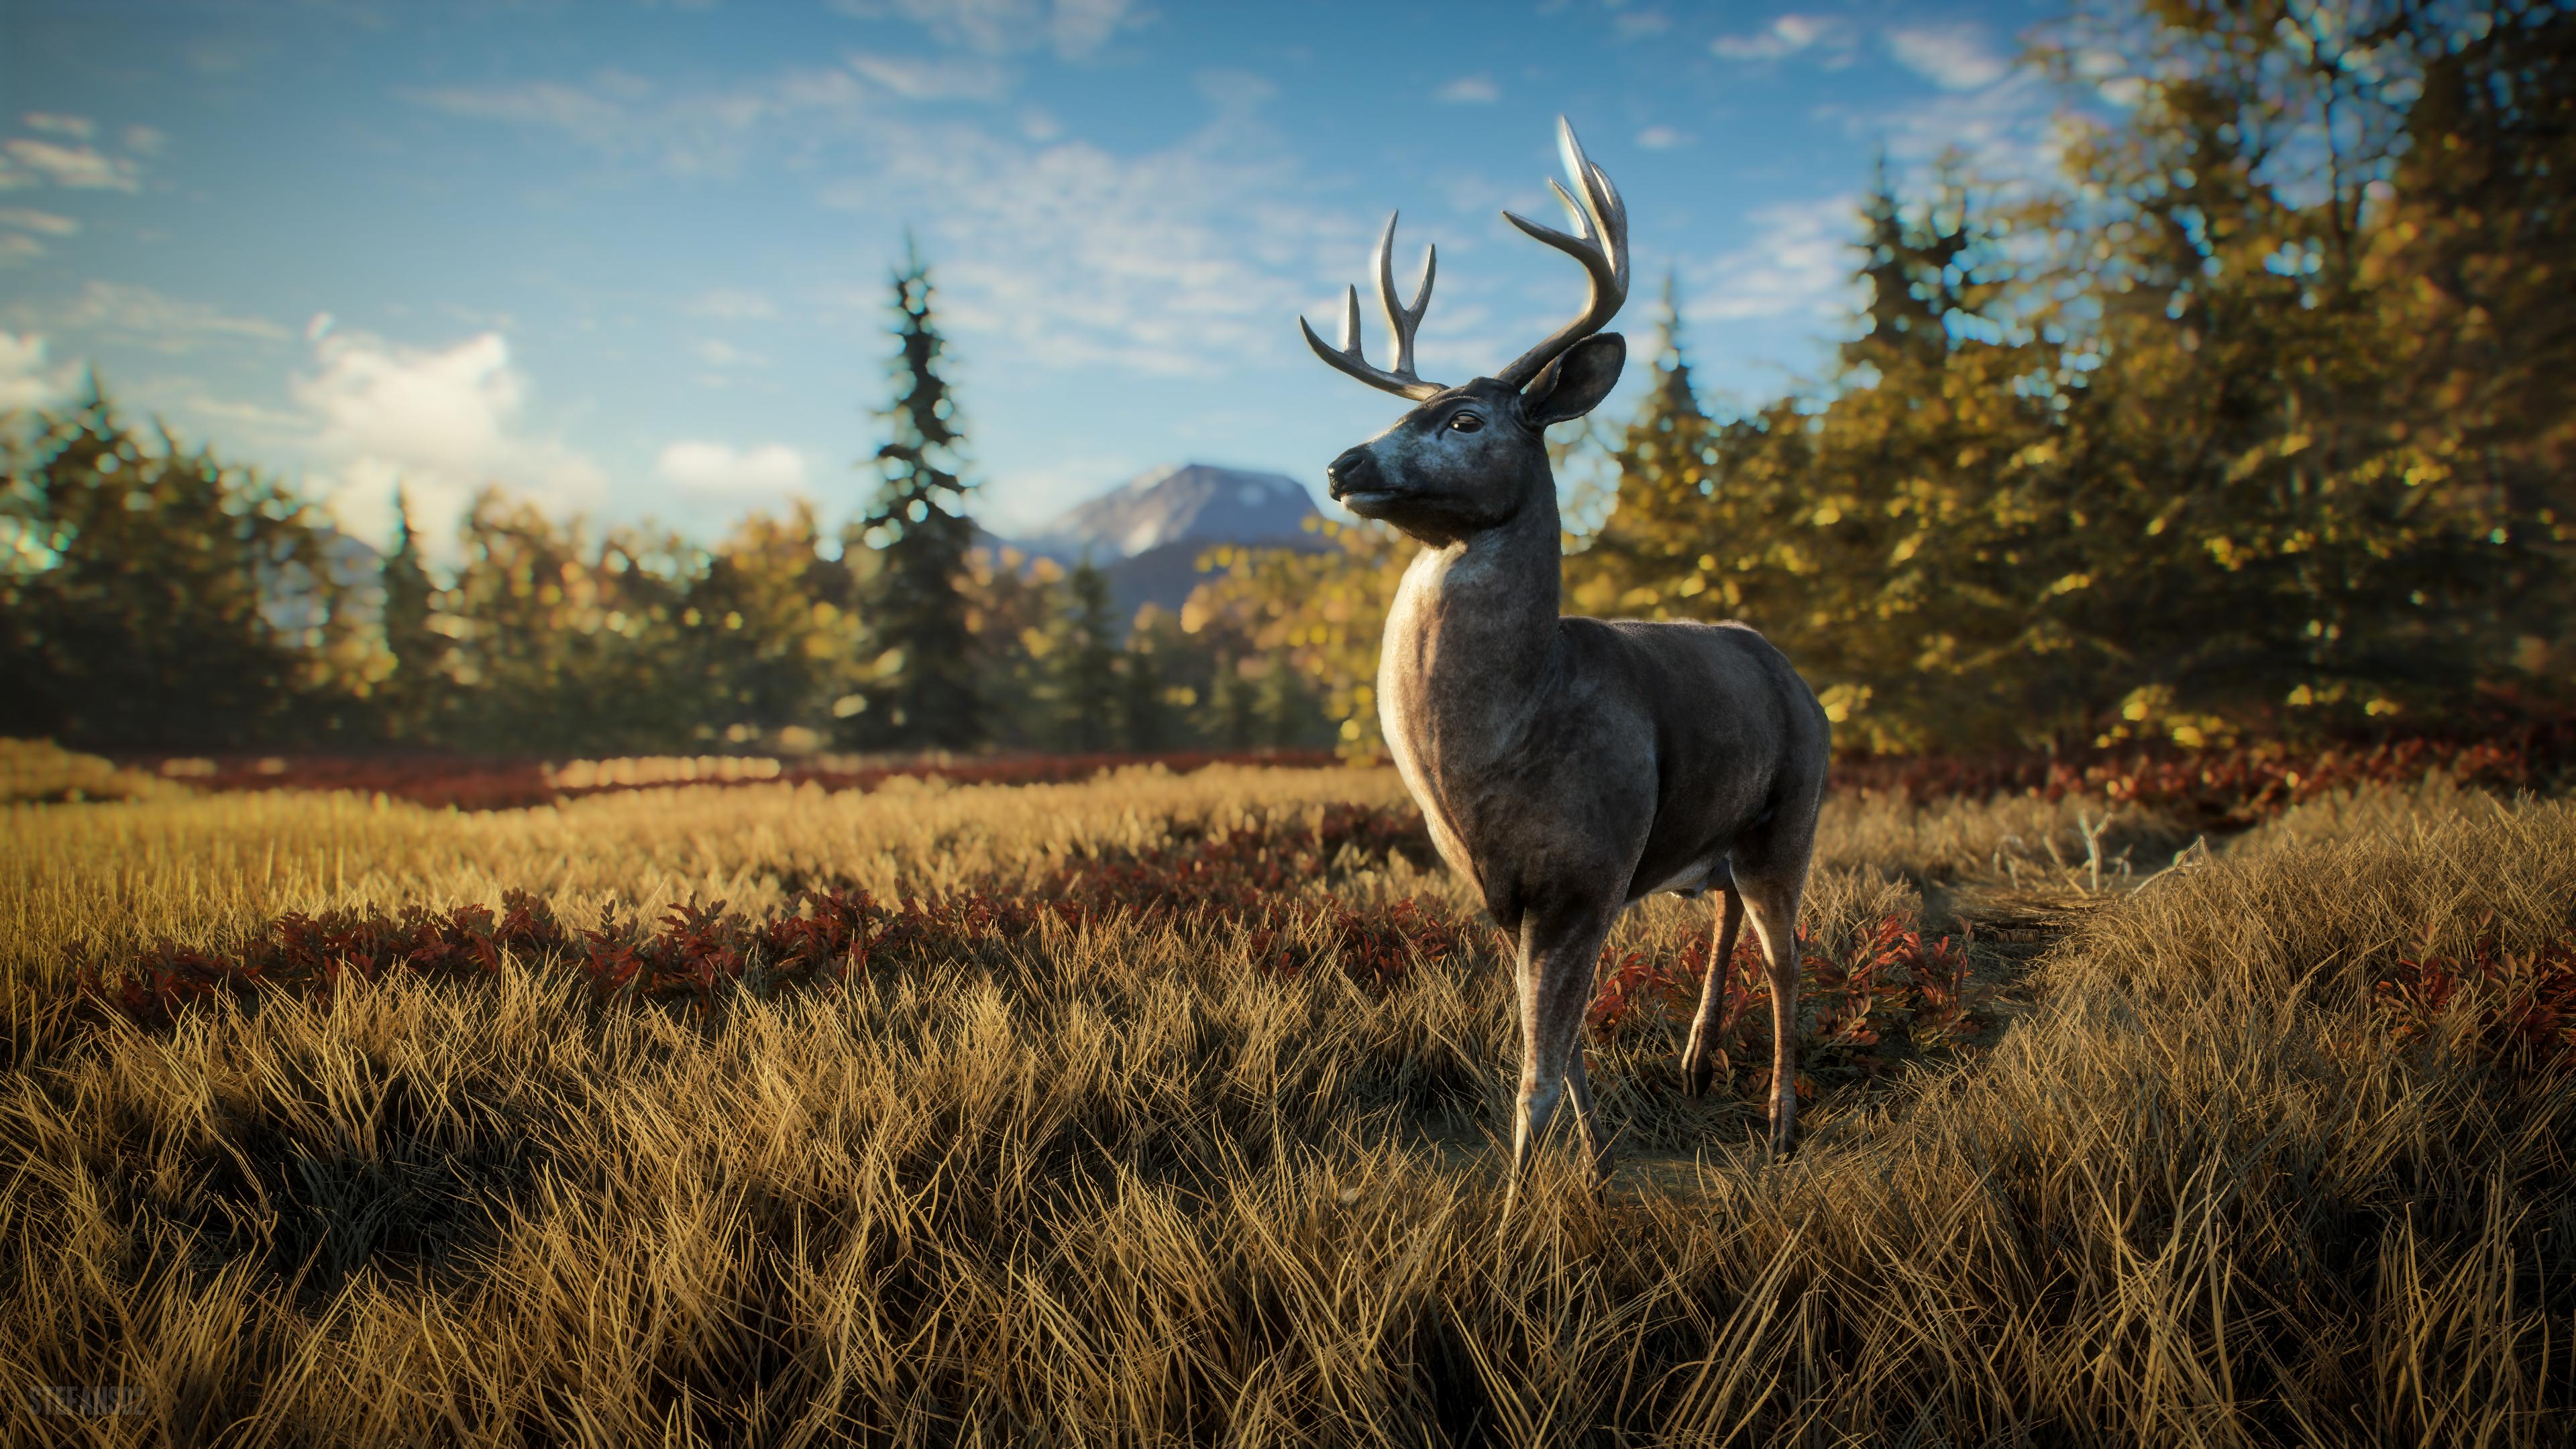 TheHunter: Call of the Wild / David the Deer is Curious 4k Ultra